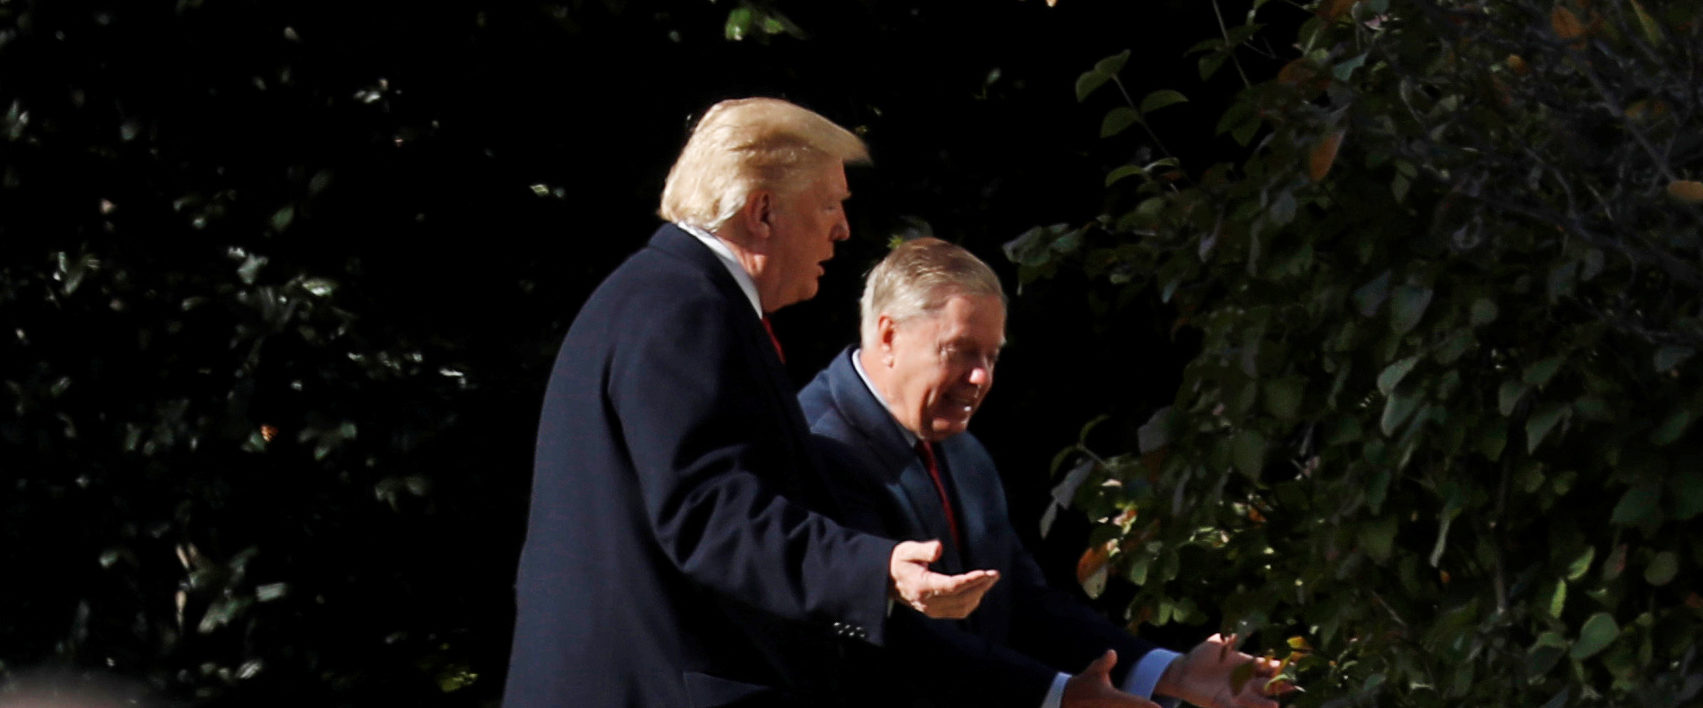 U.S. President Donald Trump walks with Sen. Lindsey Graham (R-SC) upon Trump's return from the Supreme Court to the White House in Washington, U.S., November 8, 2018. REUTERS/Kevin Lamarque